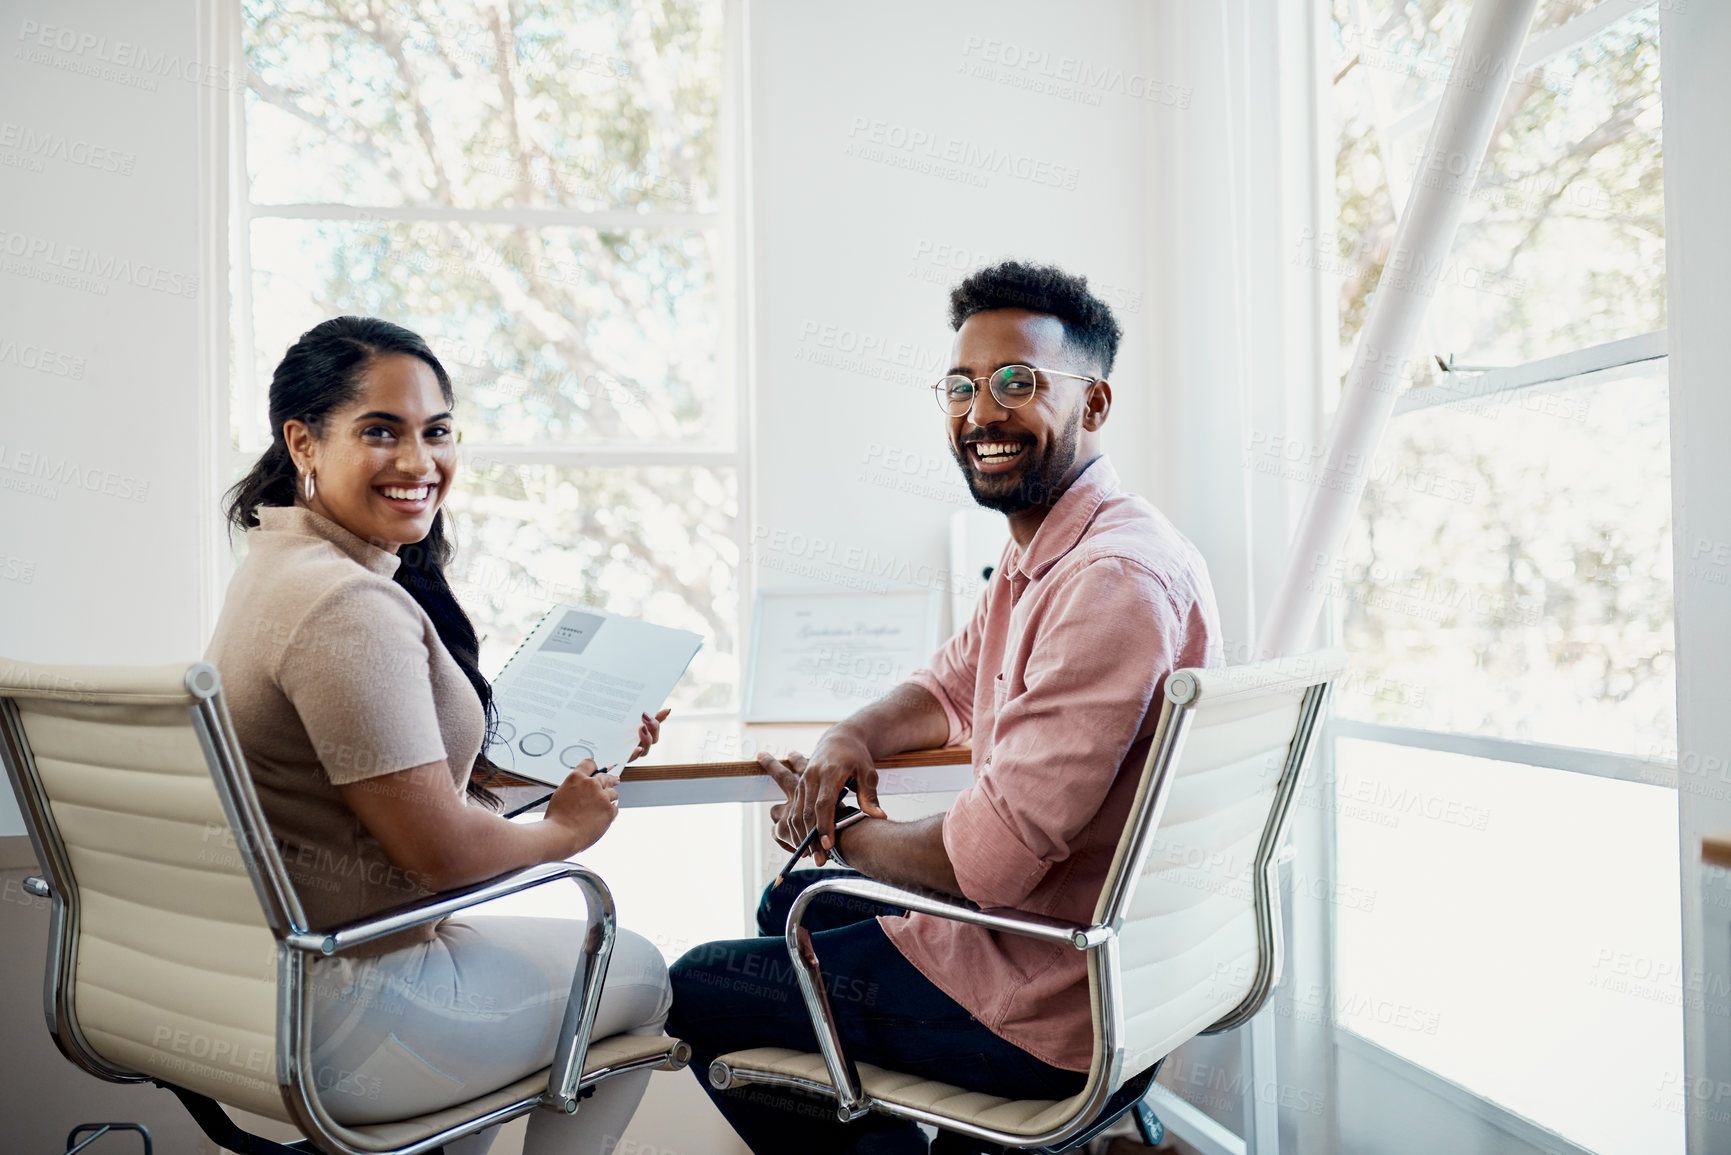 Buy stock photo Cropped portrait of two young businesspeople sitting together in the office and going through paperwork